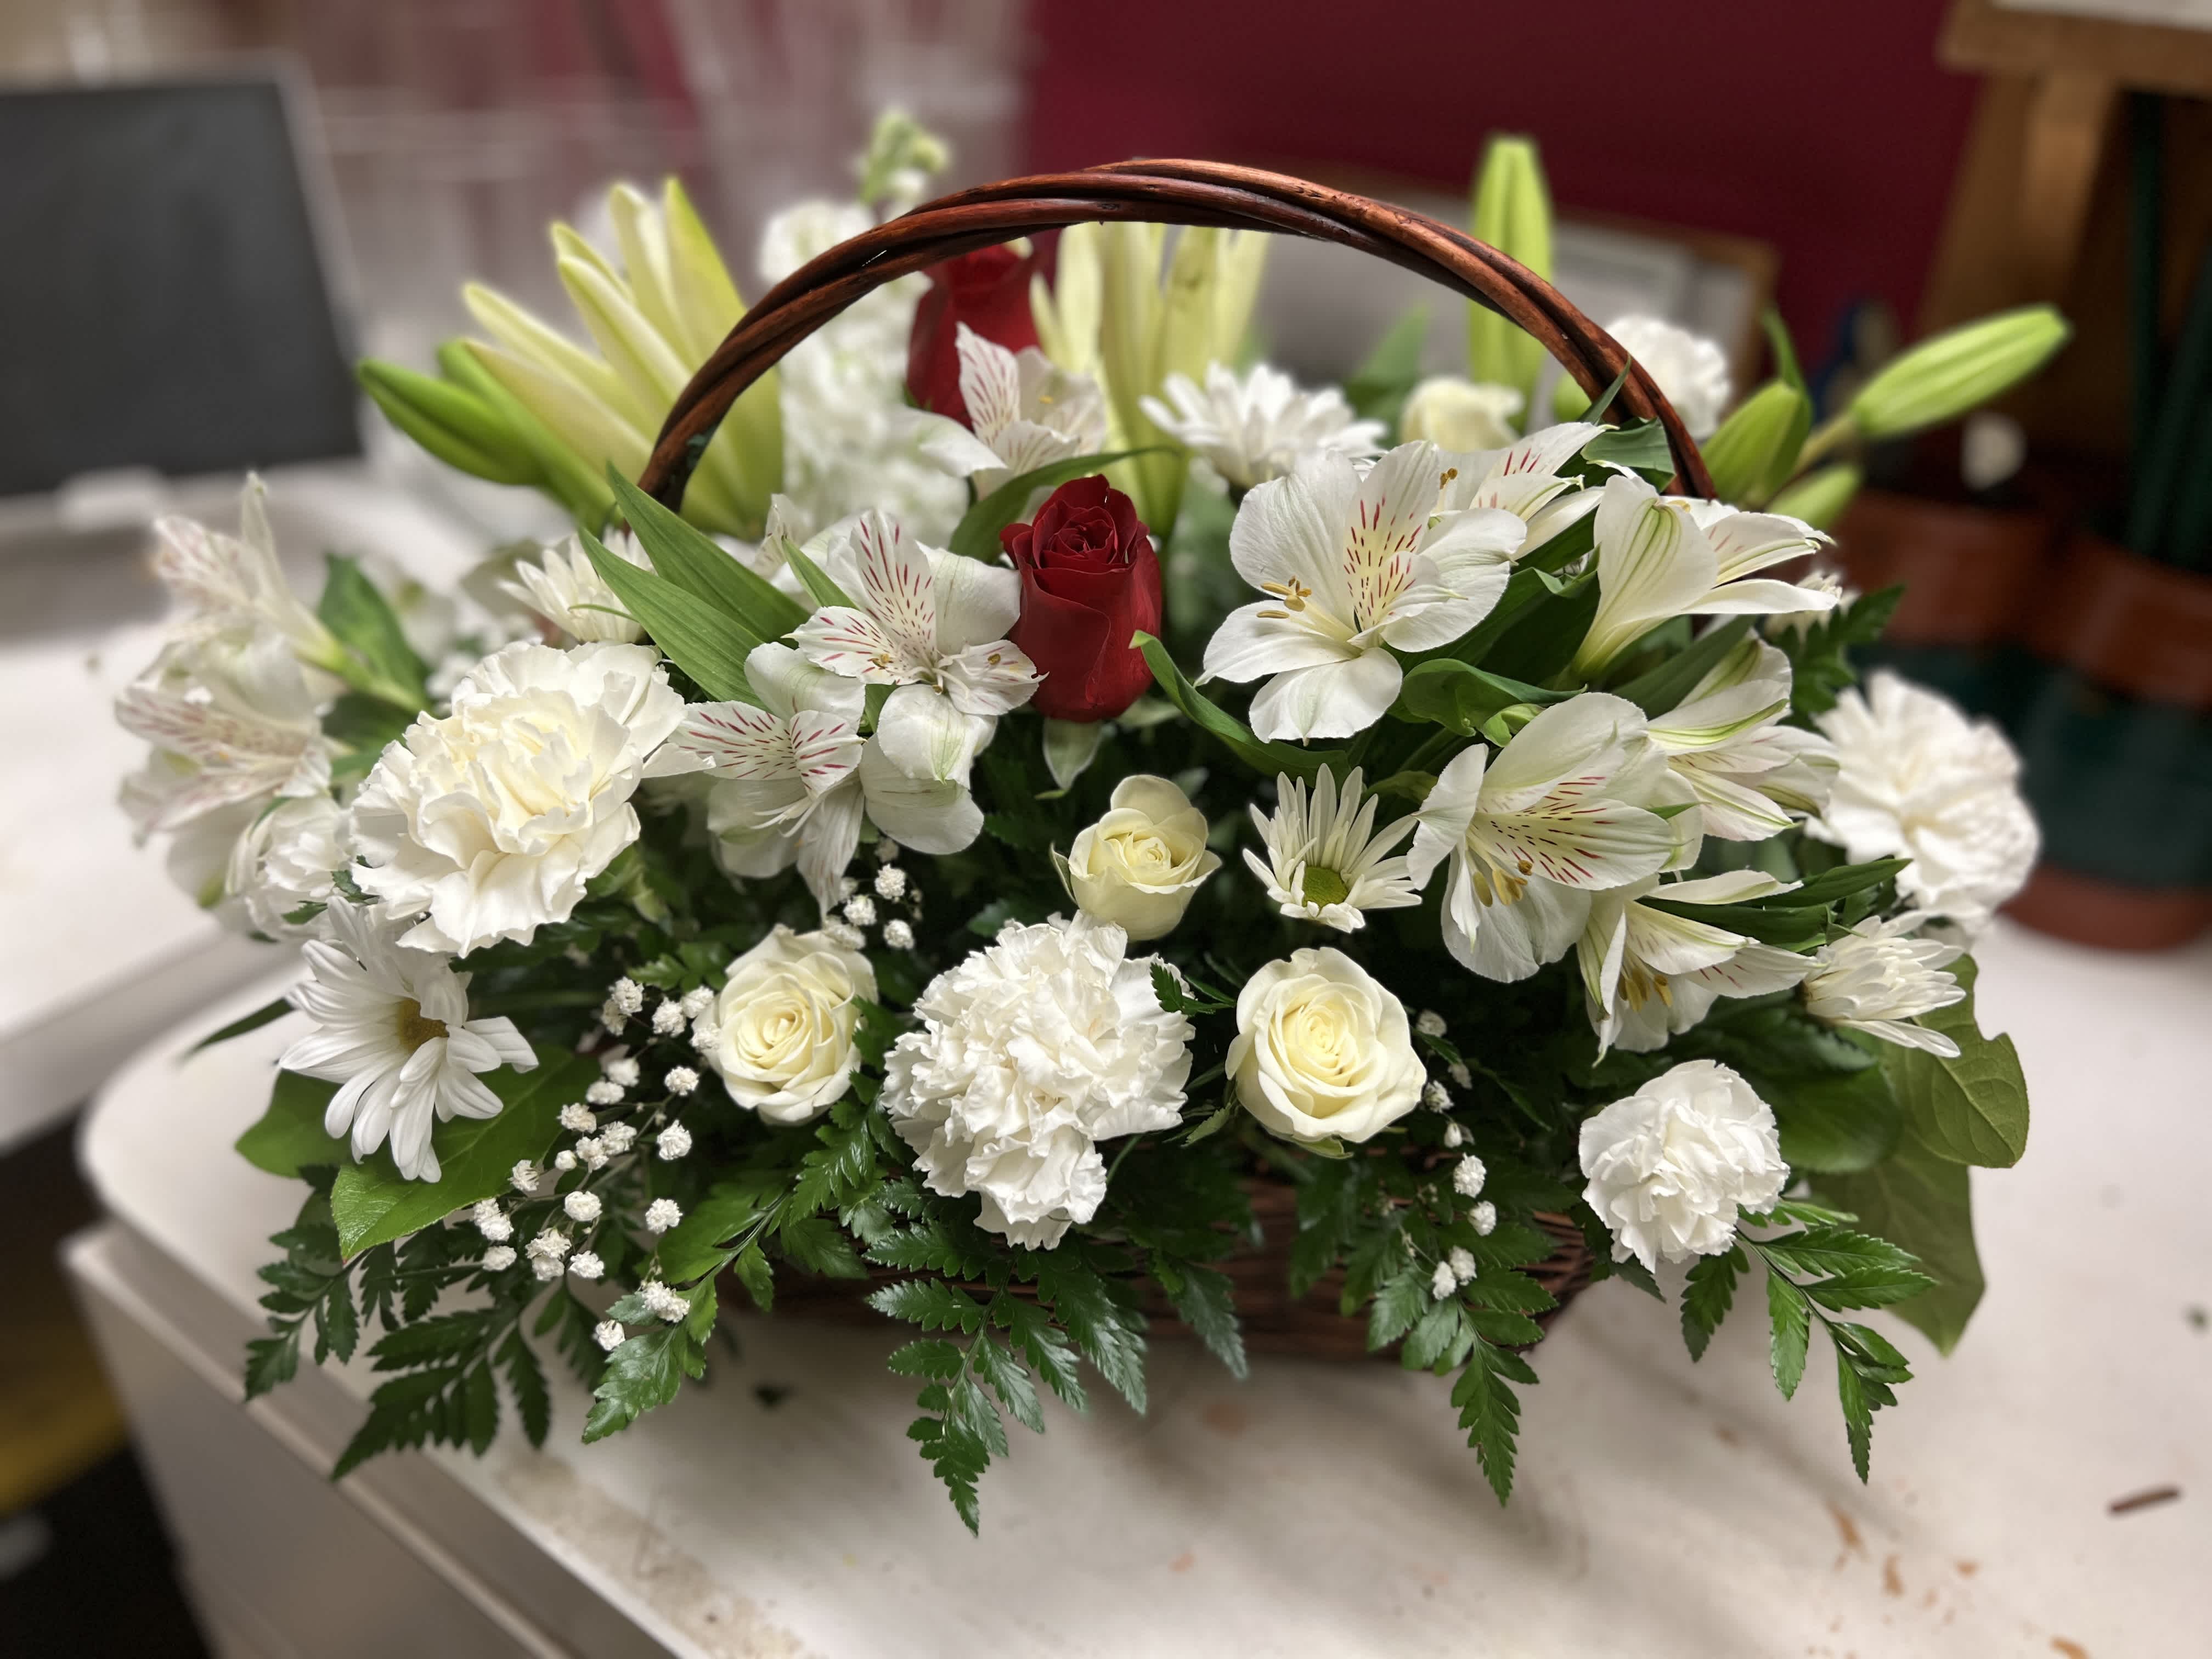 Everlasting Love - Show your everlasting love with this beautiful white basket filled with lilies, alstromeria, spray roses, stock, carnations, &amp; daisys accented with 2 red roses to represent that everlasting love of you both. **Call for additional color combinations**